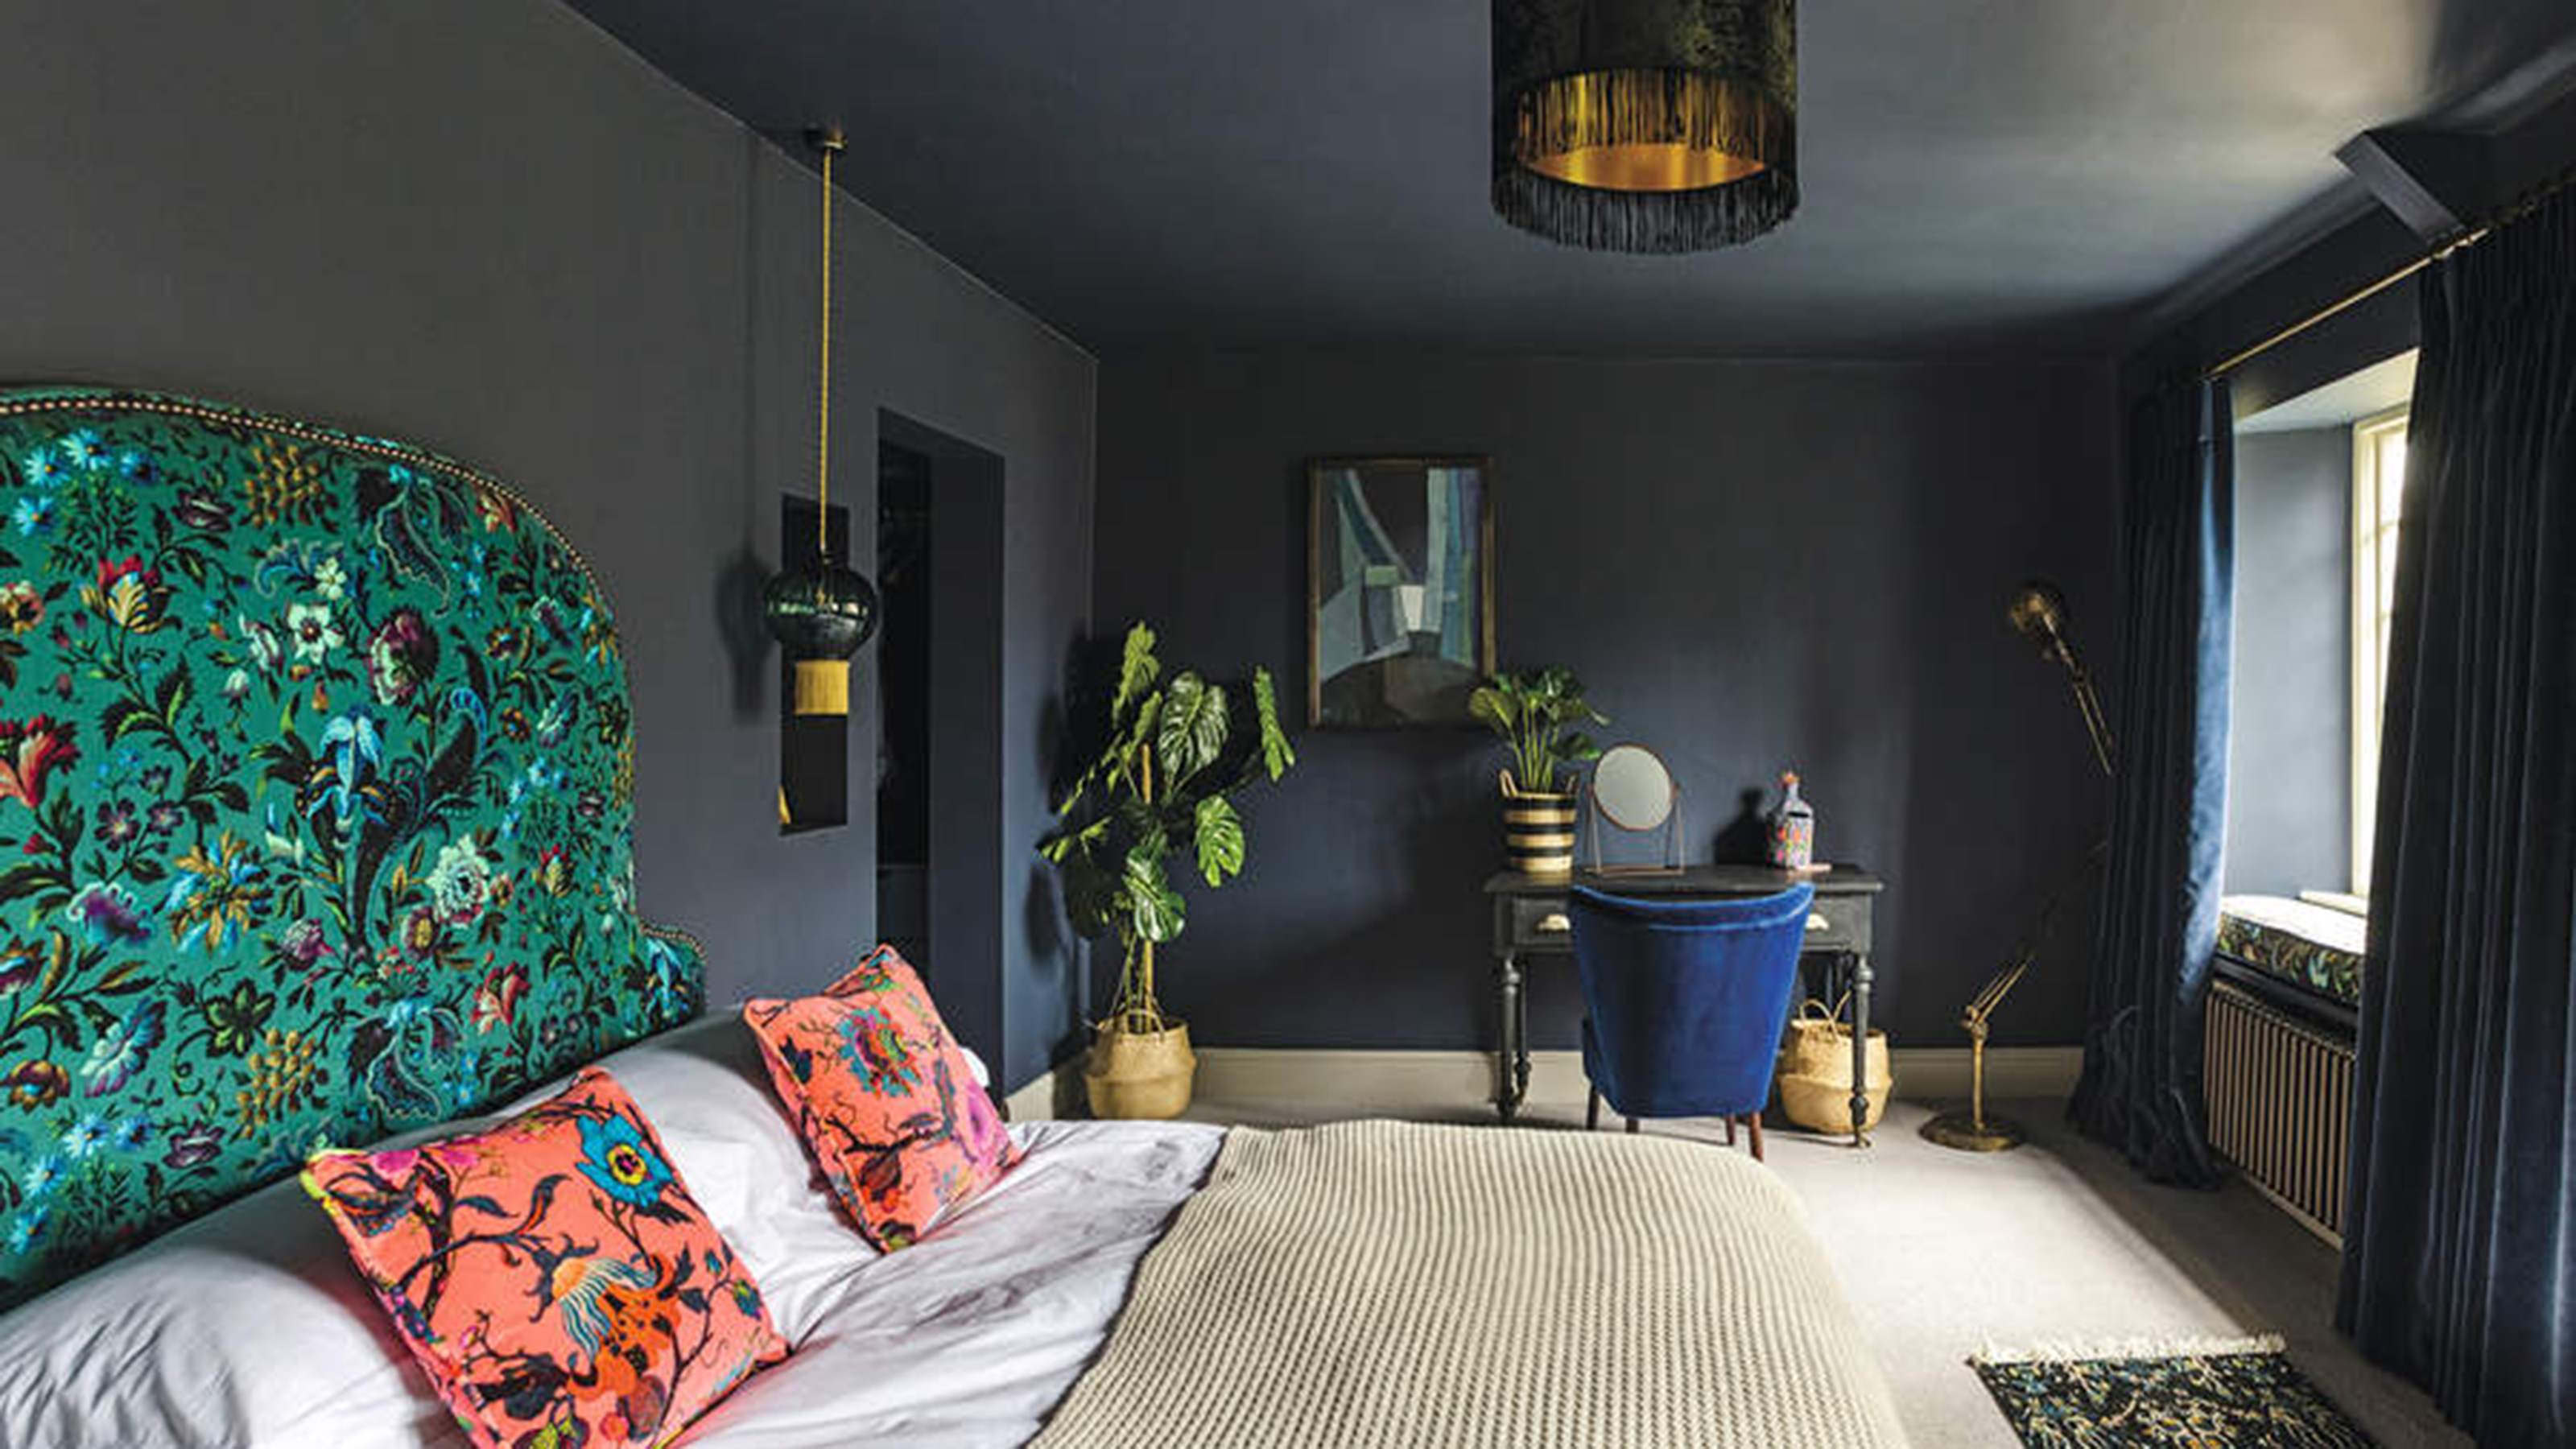 25 bedroom paint colors for a simple, budget friendly refresh ...